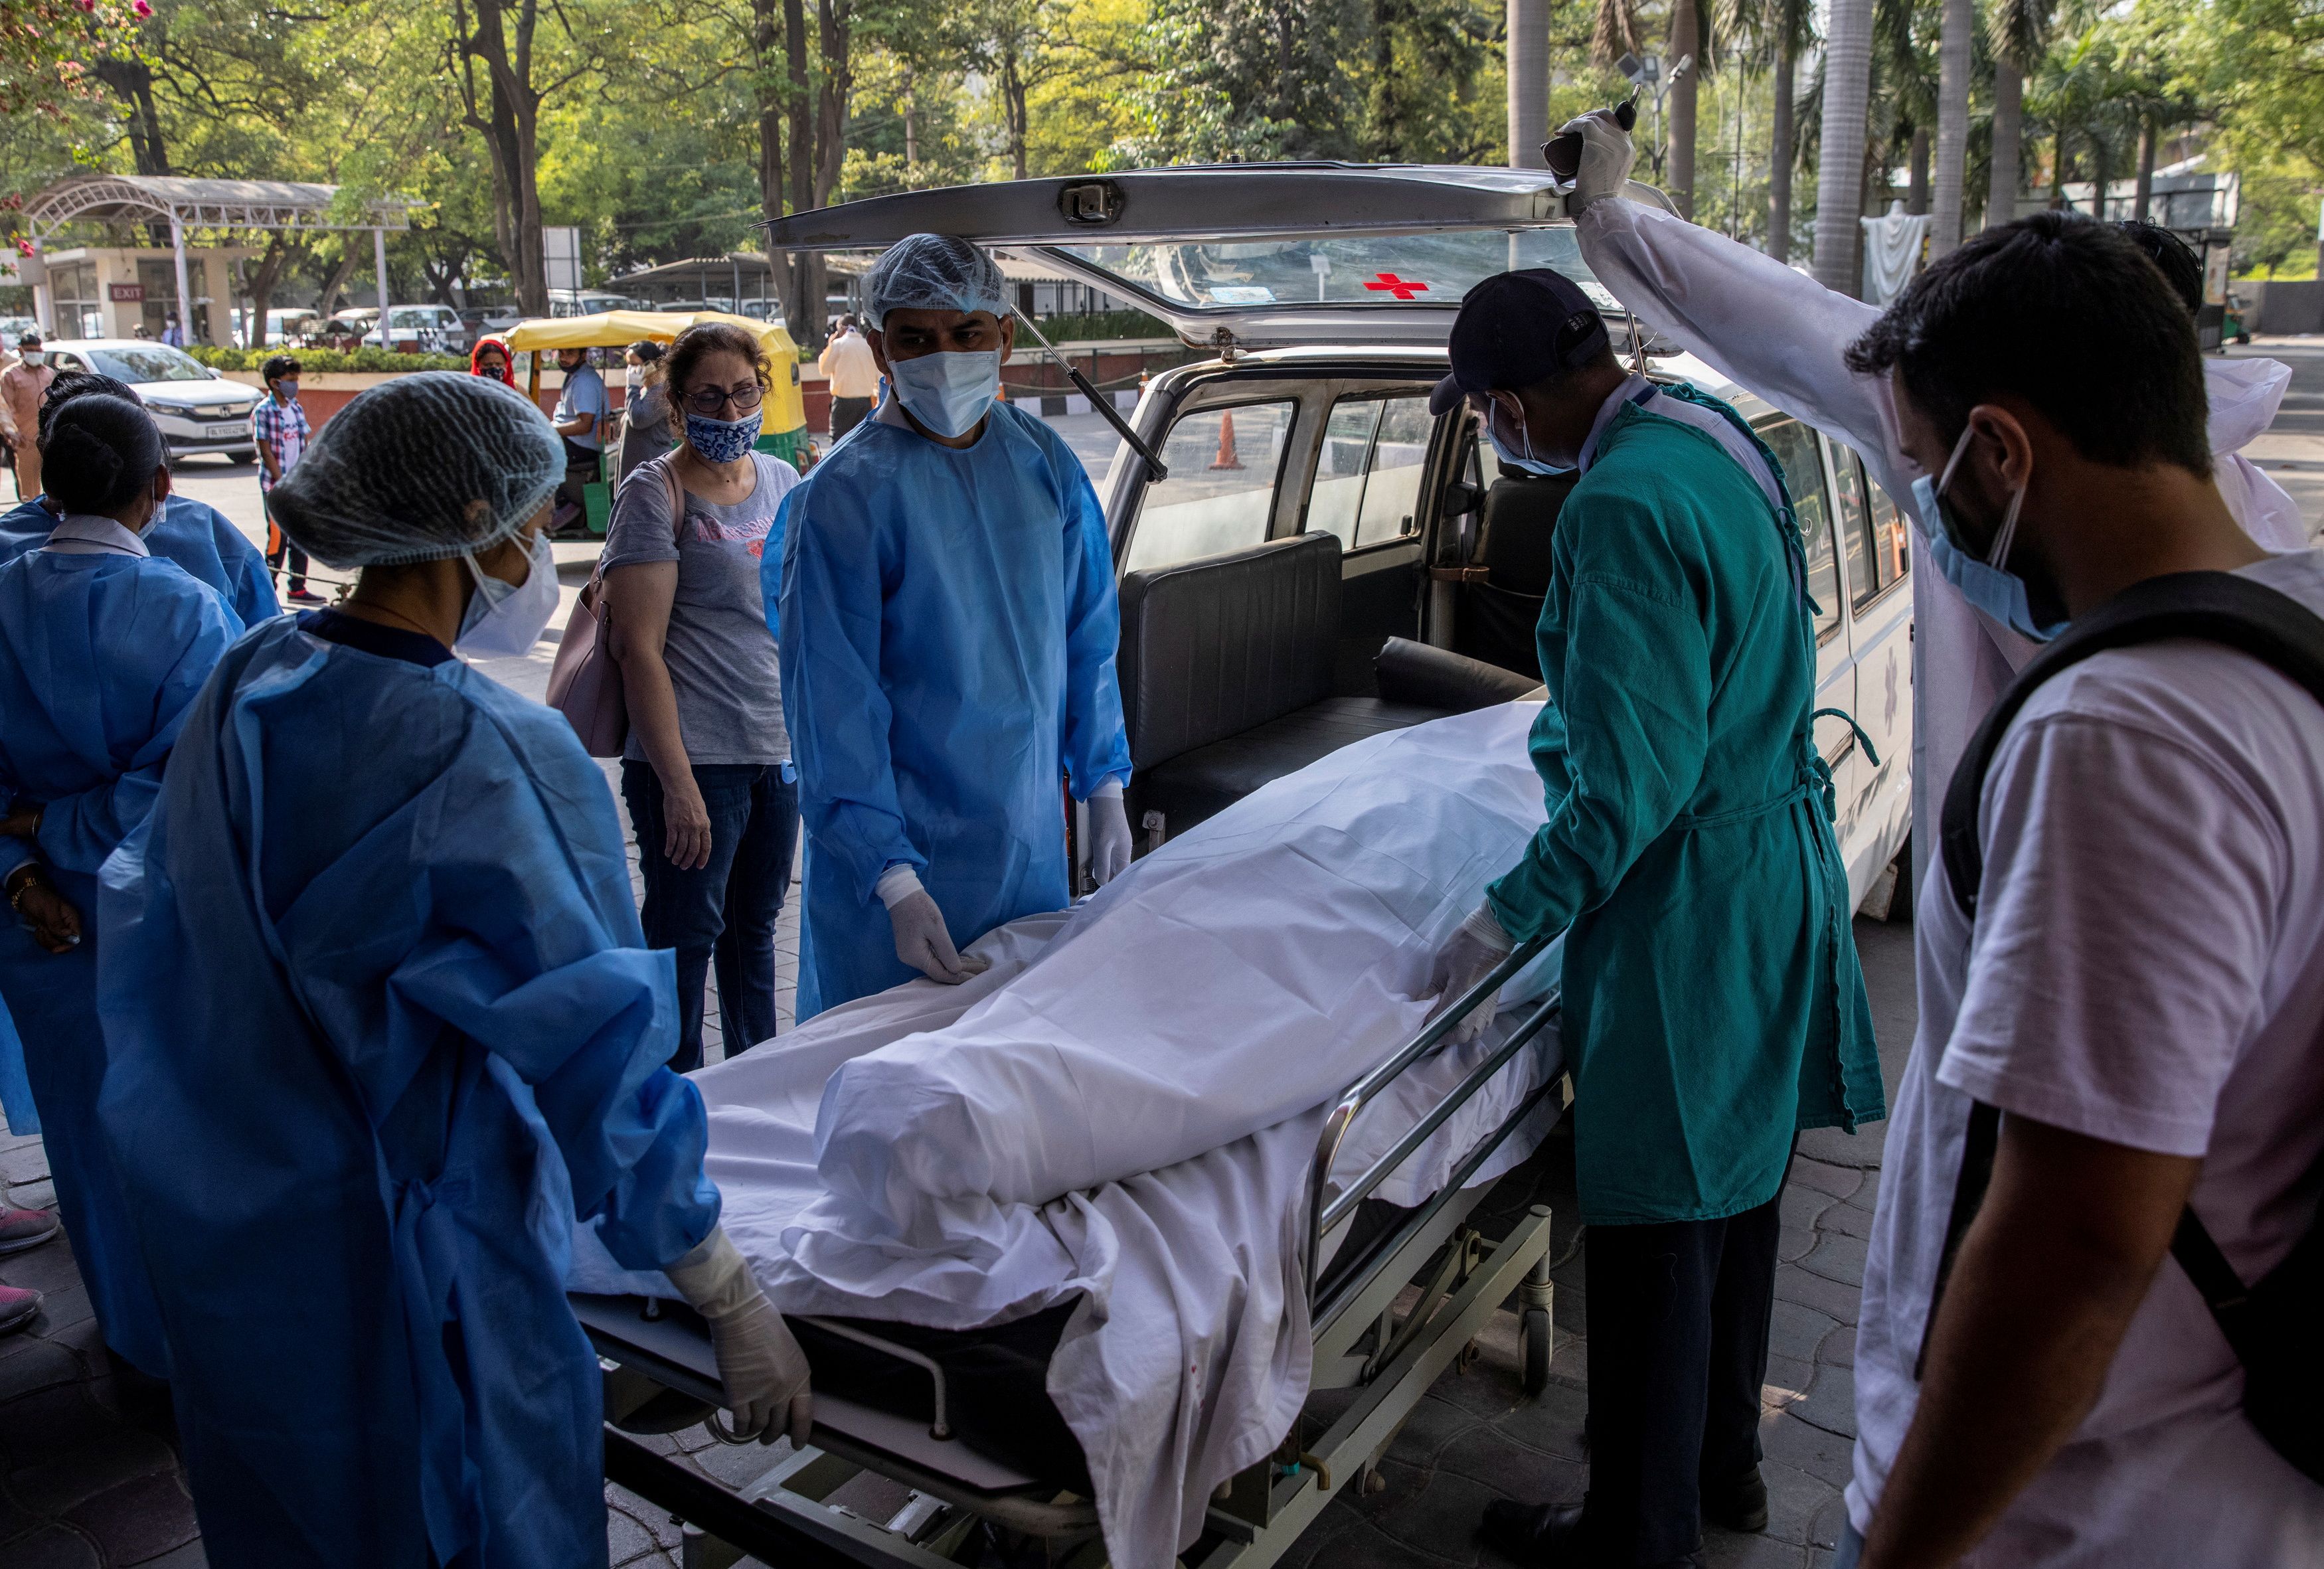 Relatives of Karuna Vadhera, 74, who died while suffering from complications related to the coronavirus disease (COVID-19), stand by her body as it is moved out of the emergency room to be taken to a crematorium, at Holy Family Hospital in New Delhi, India, May 2, 2021. REUTERS/Danish Siddiqui     